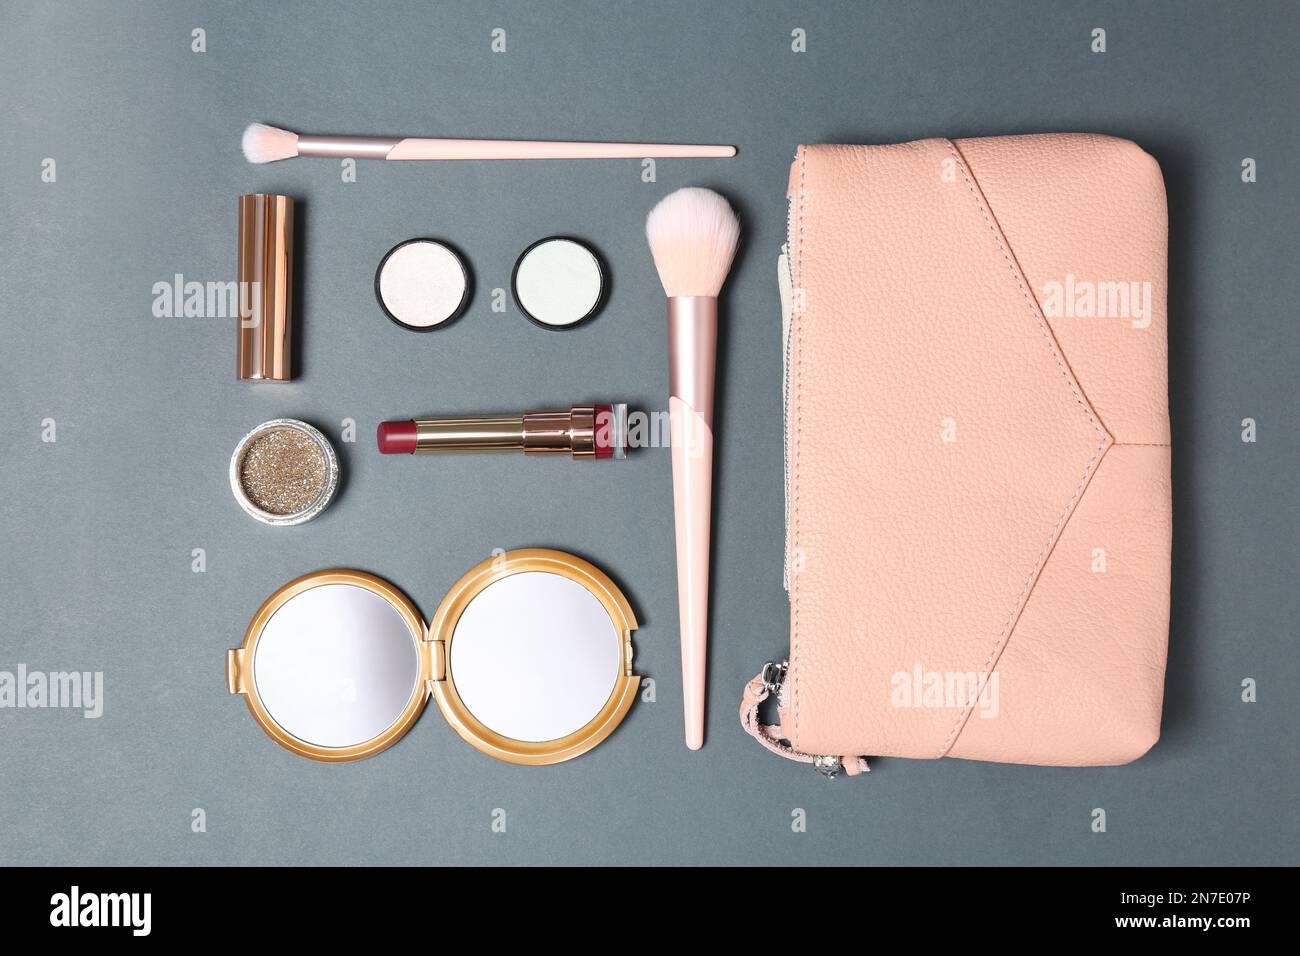 Cosmetic bag with makeup products on grey background, flat lay Stock Photo